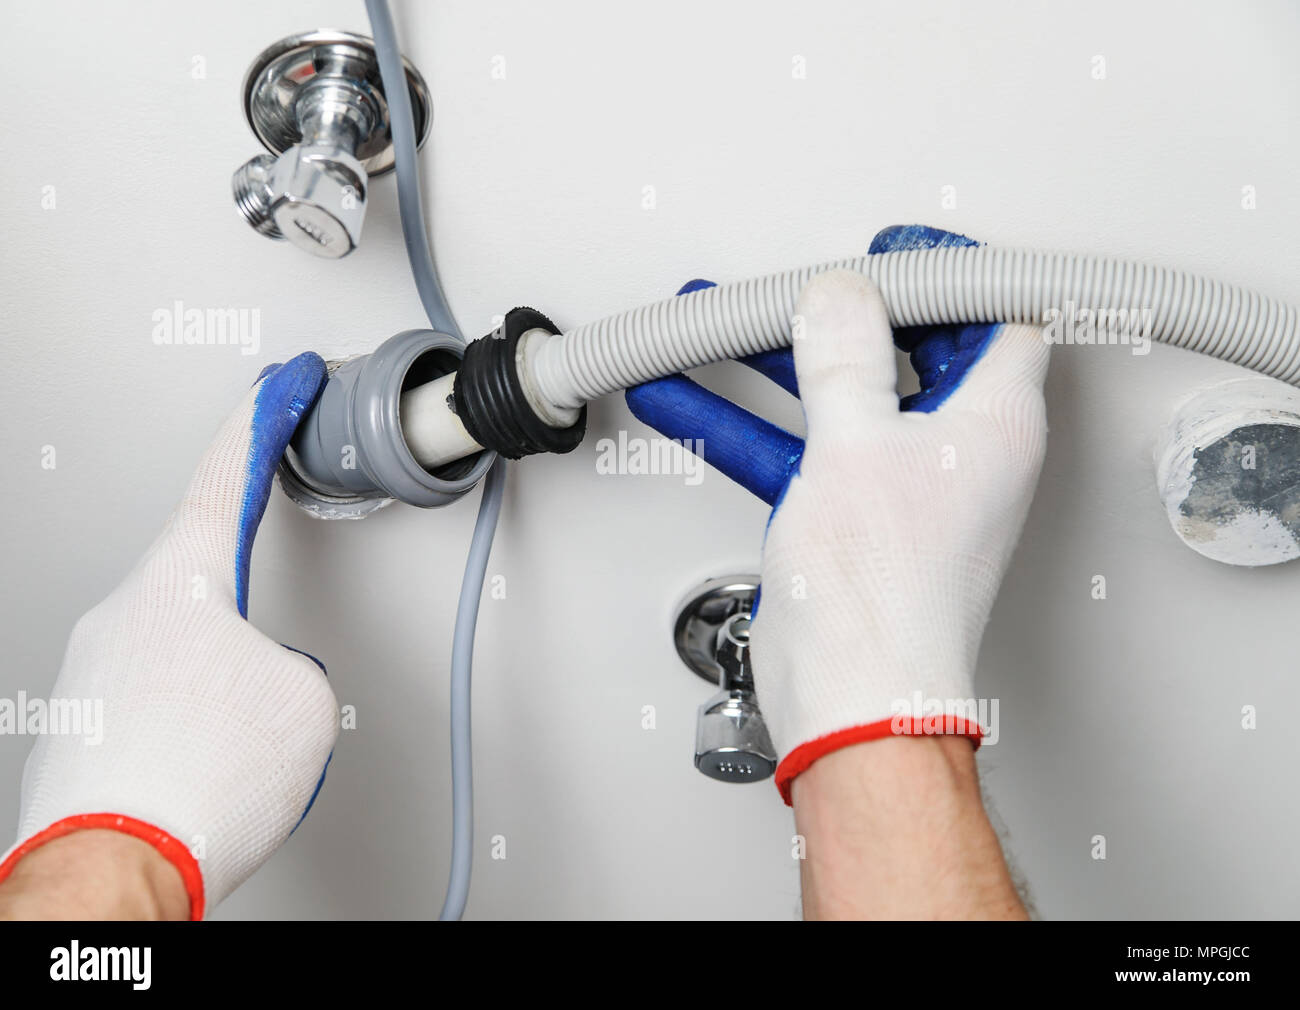 Installation of household appliances. Workman attaches a drain hose to a sewage pipe. Stock Photo